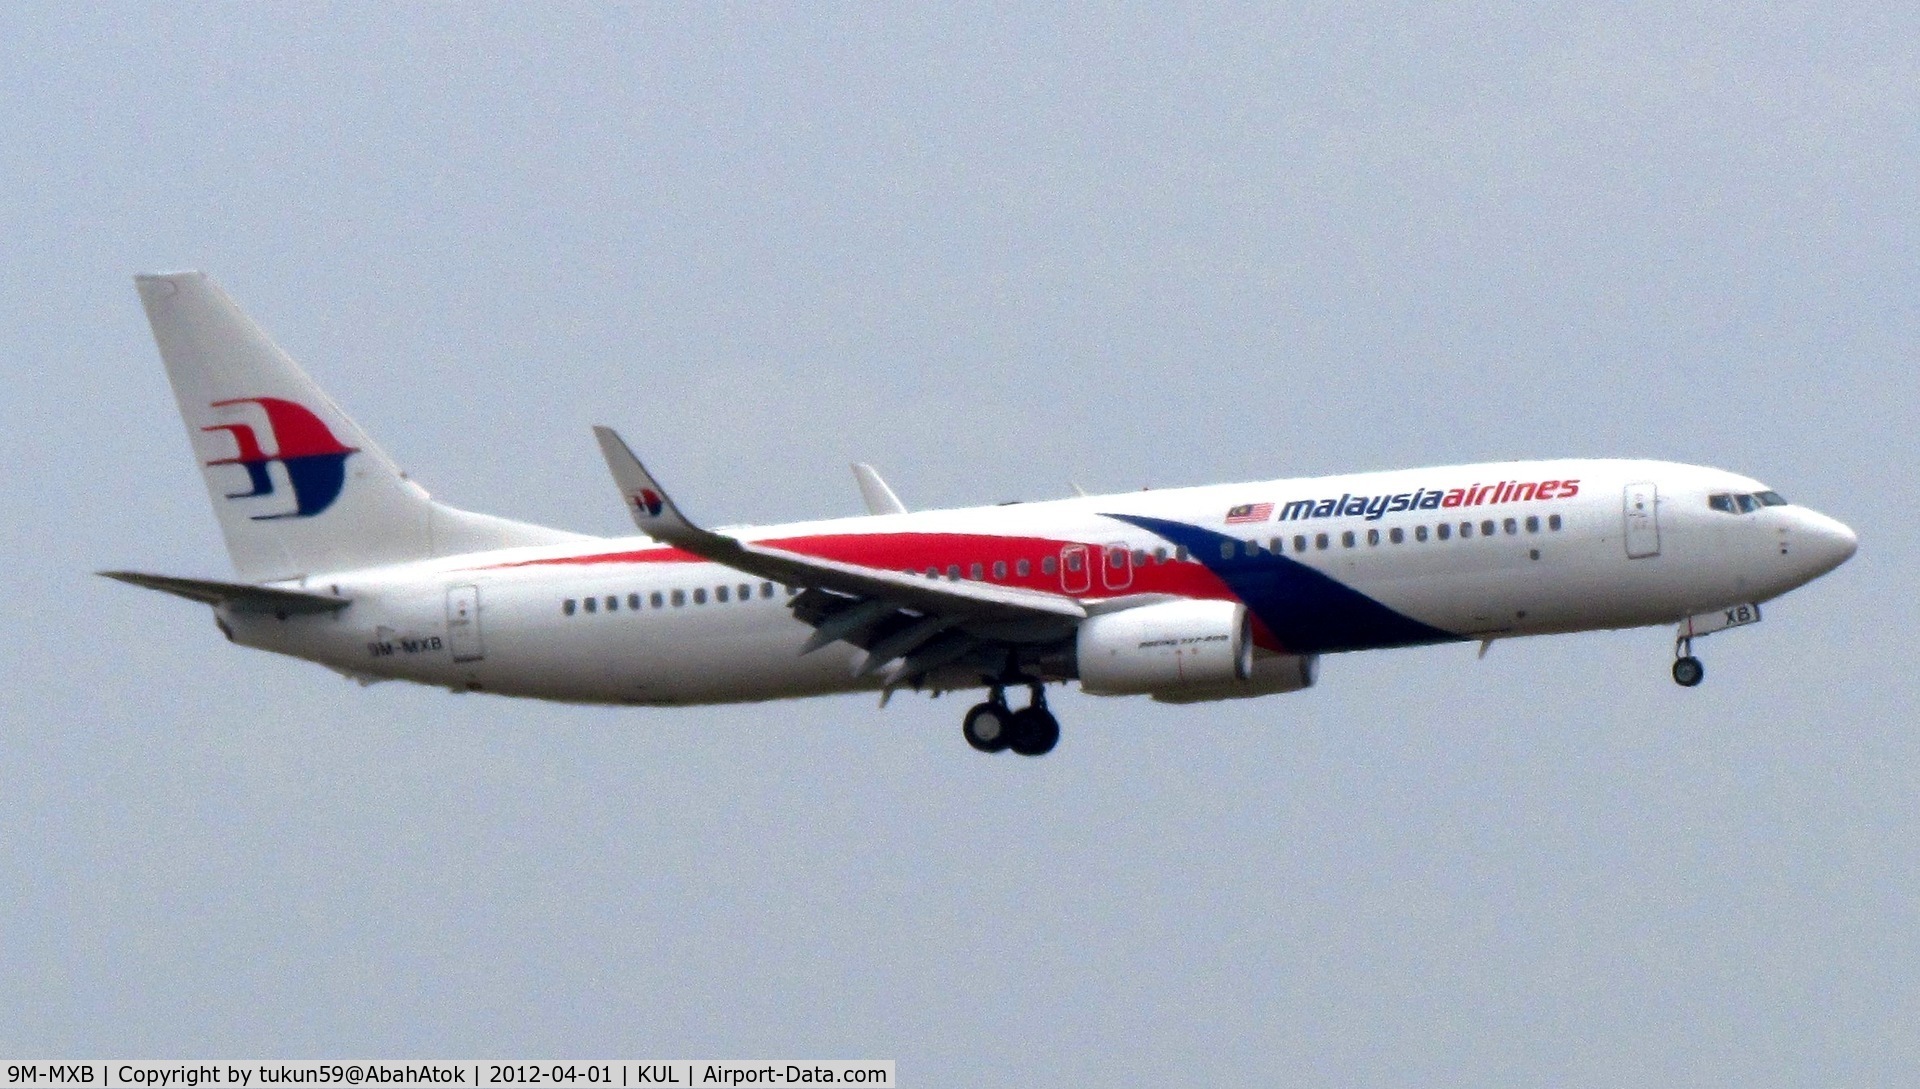 9M-MXB, 2010 Boeing 737-8H6 C/N 40129, Malaysia Airlines